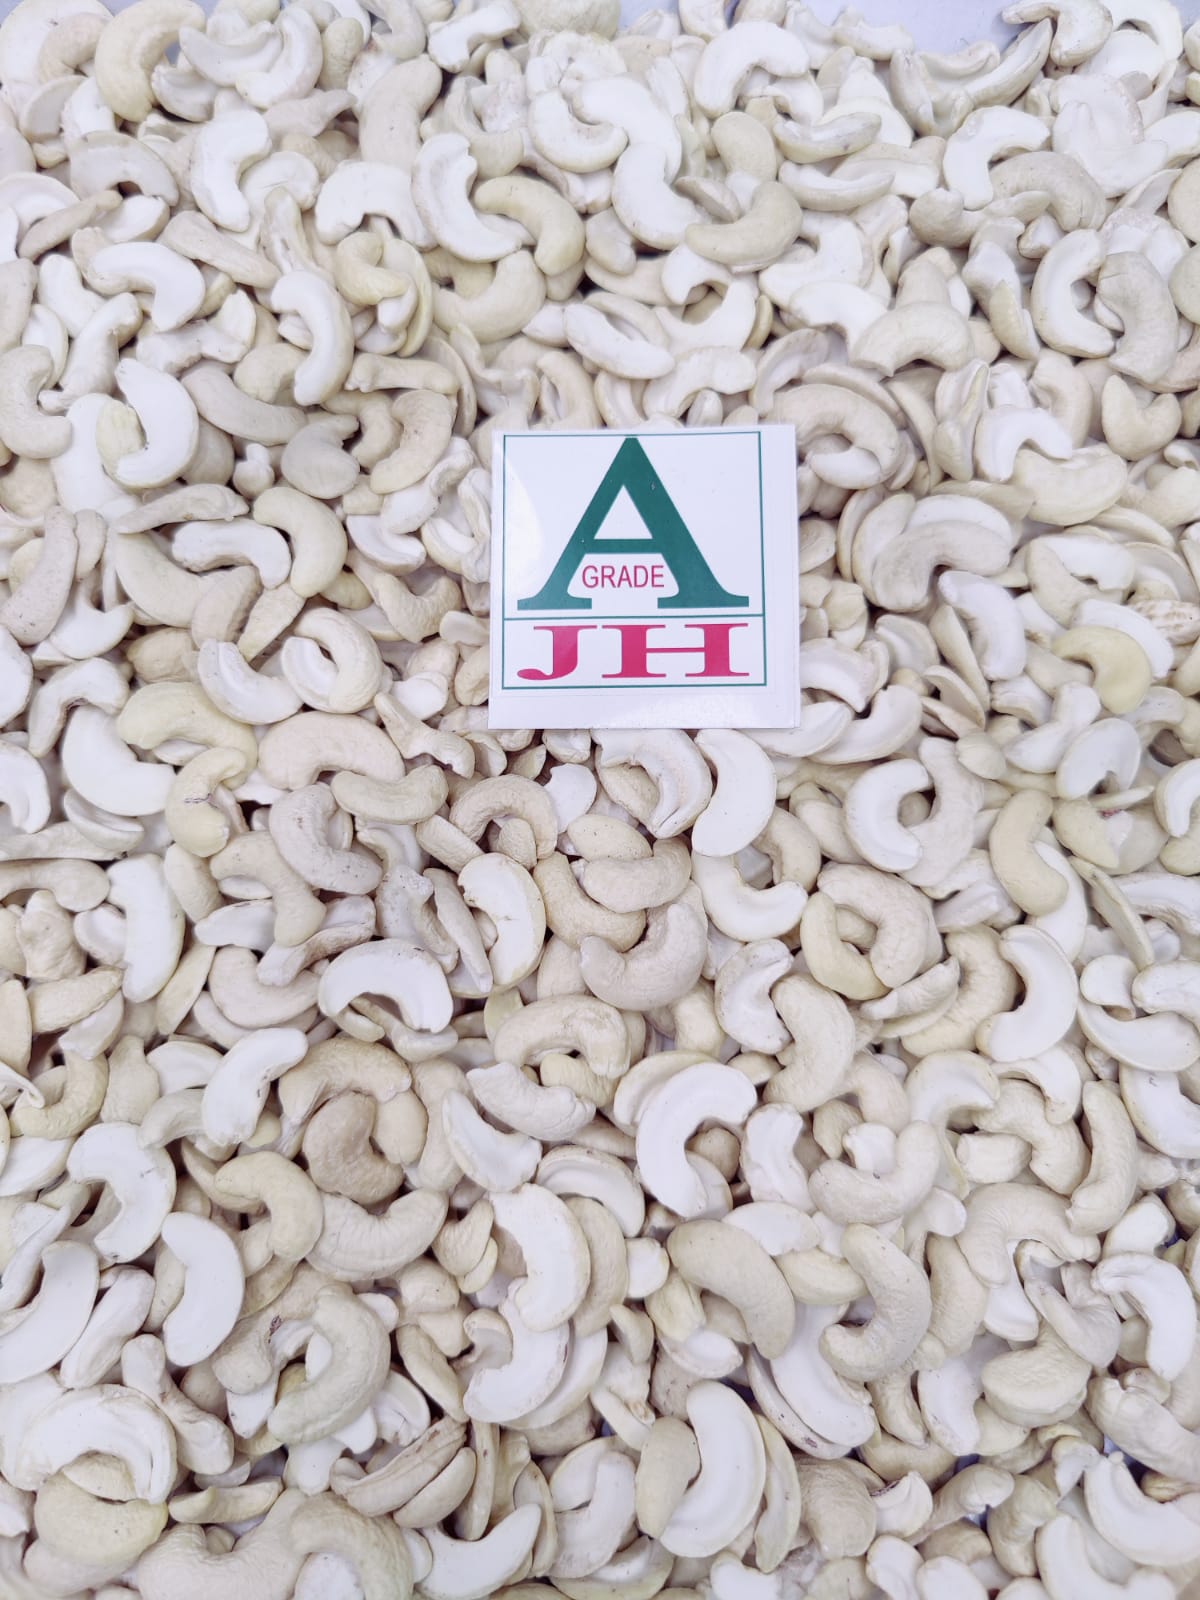 Good Quality Cashew Grade - AJH  from Aditya Nuts & Spices 